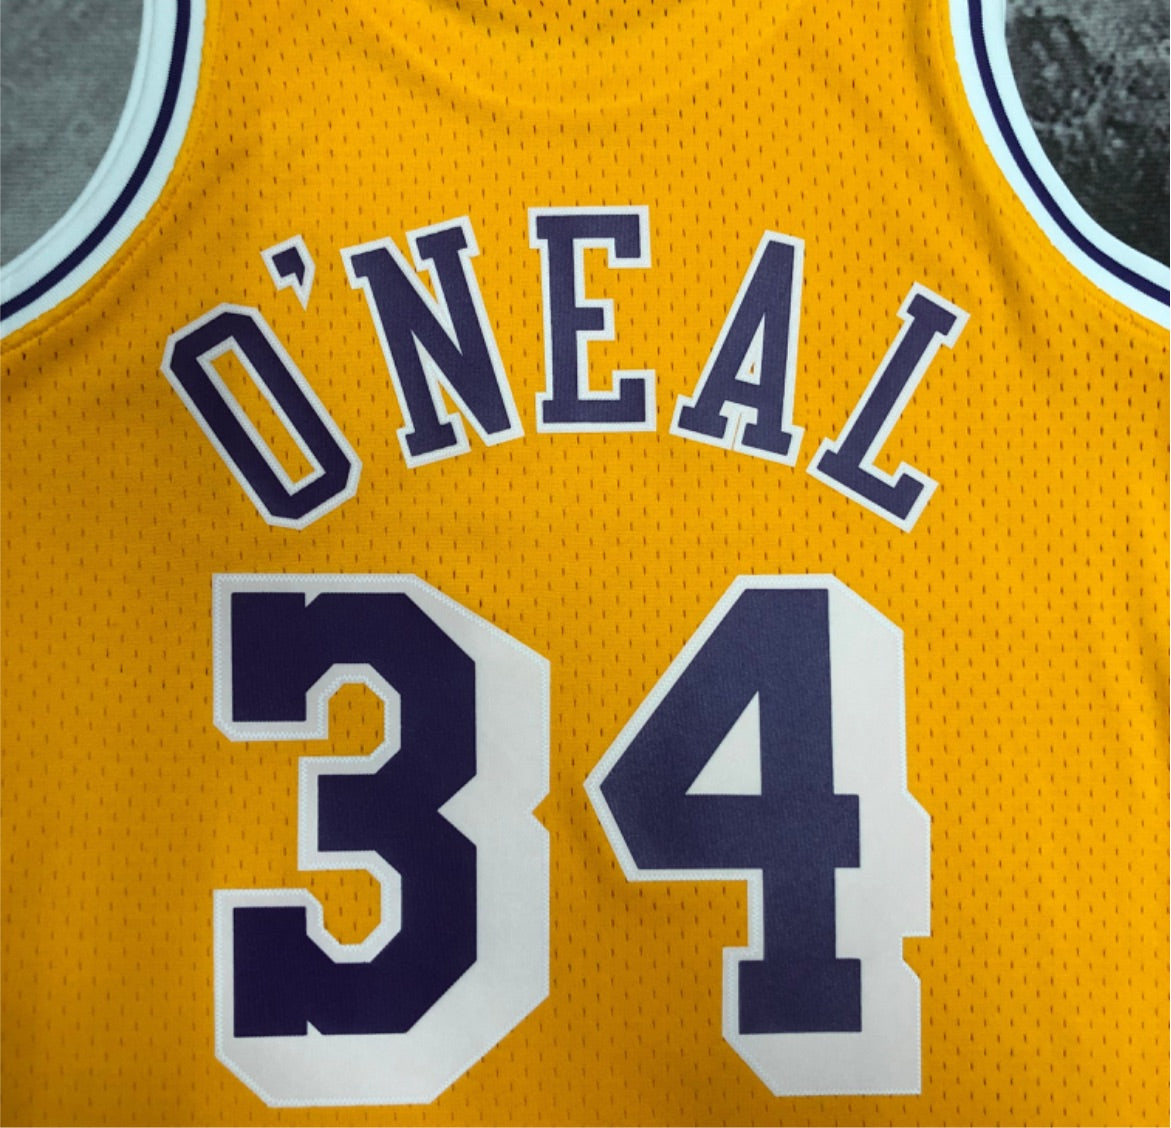 Los Angeles Lakers Shaquille O'Neal Mitchell & Ness 1996-97 Hardwood Classics Jersey